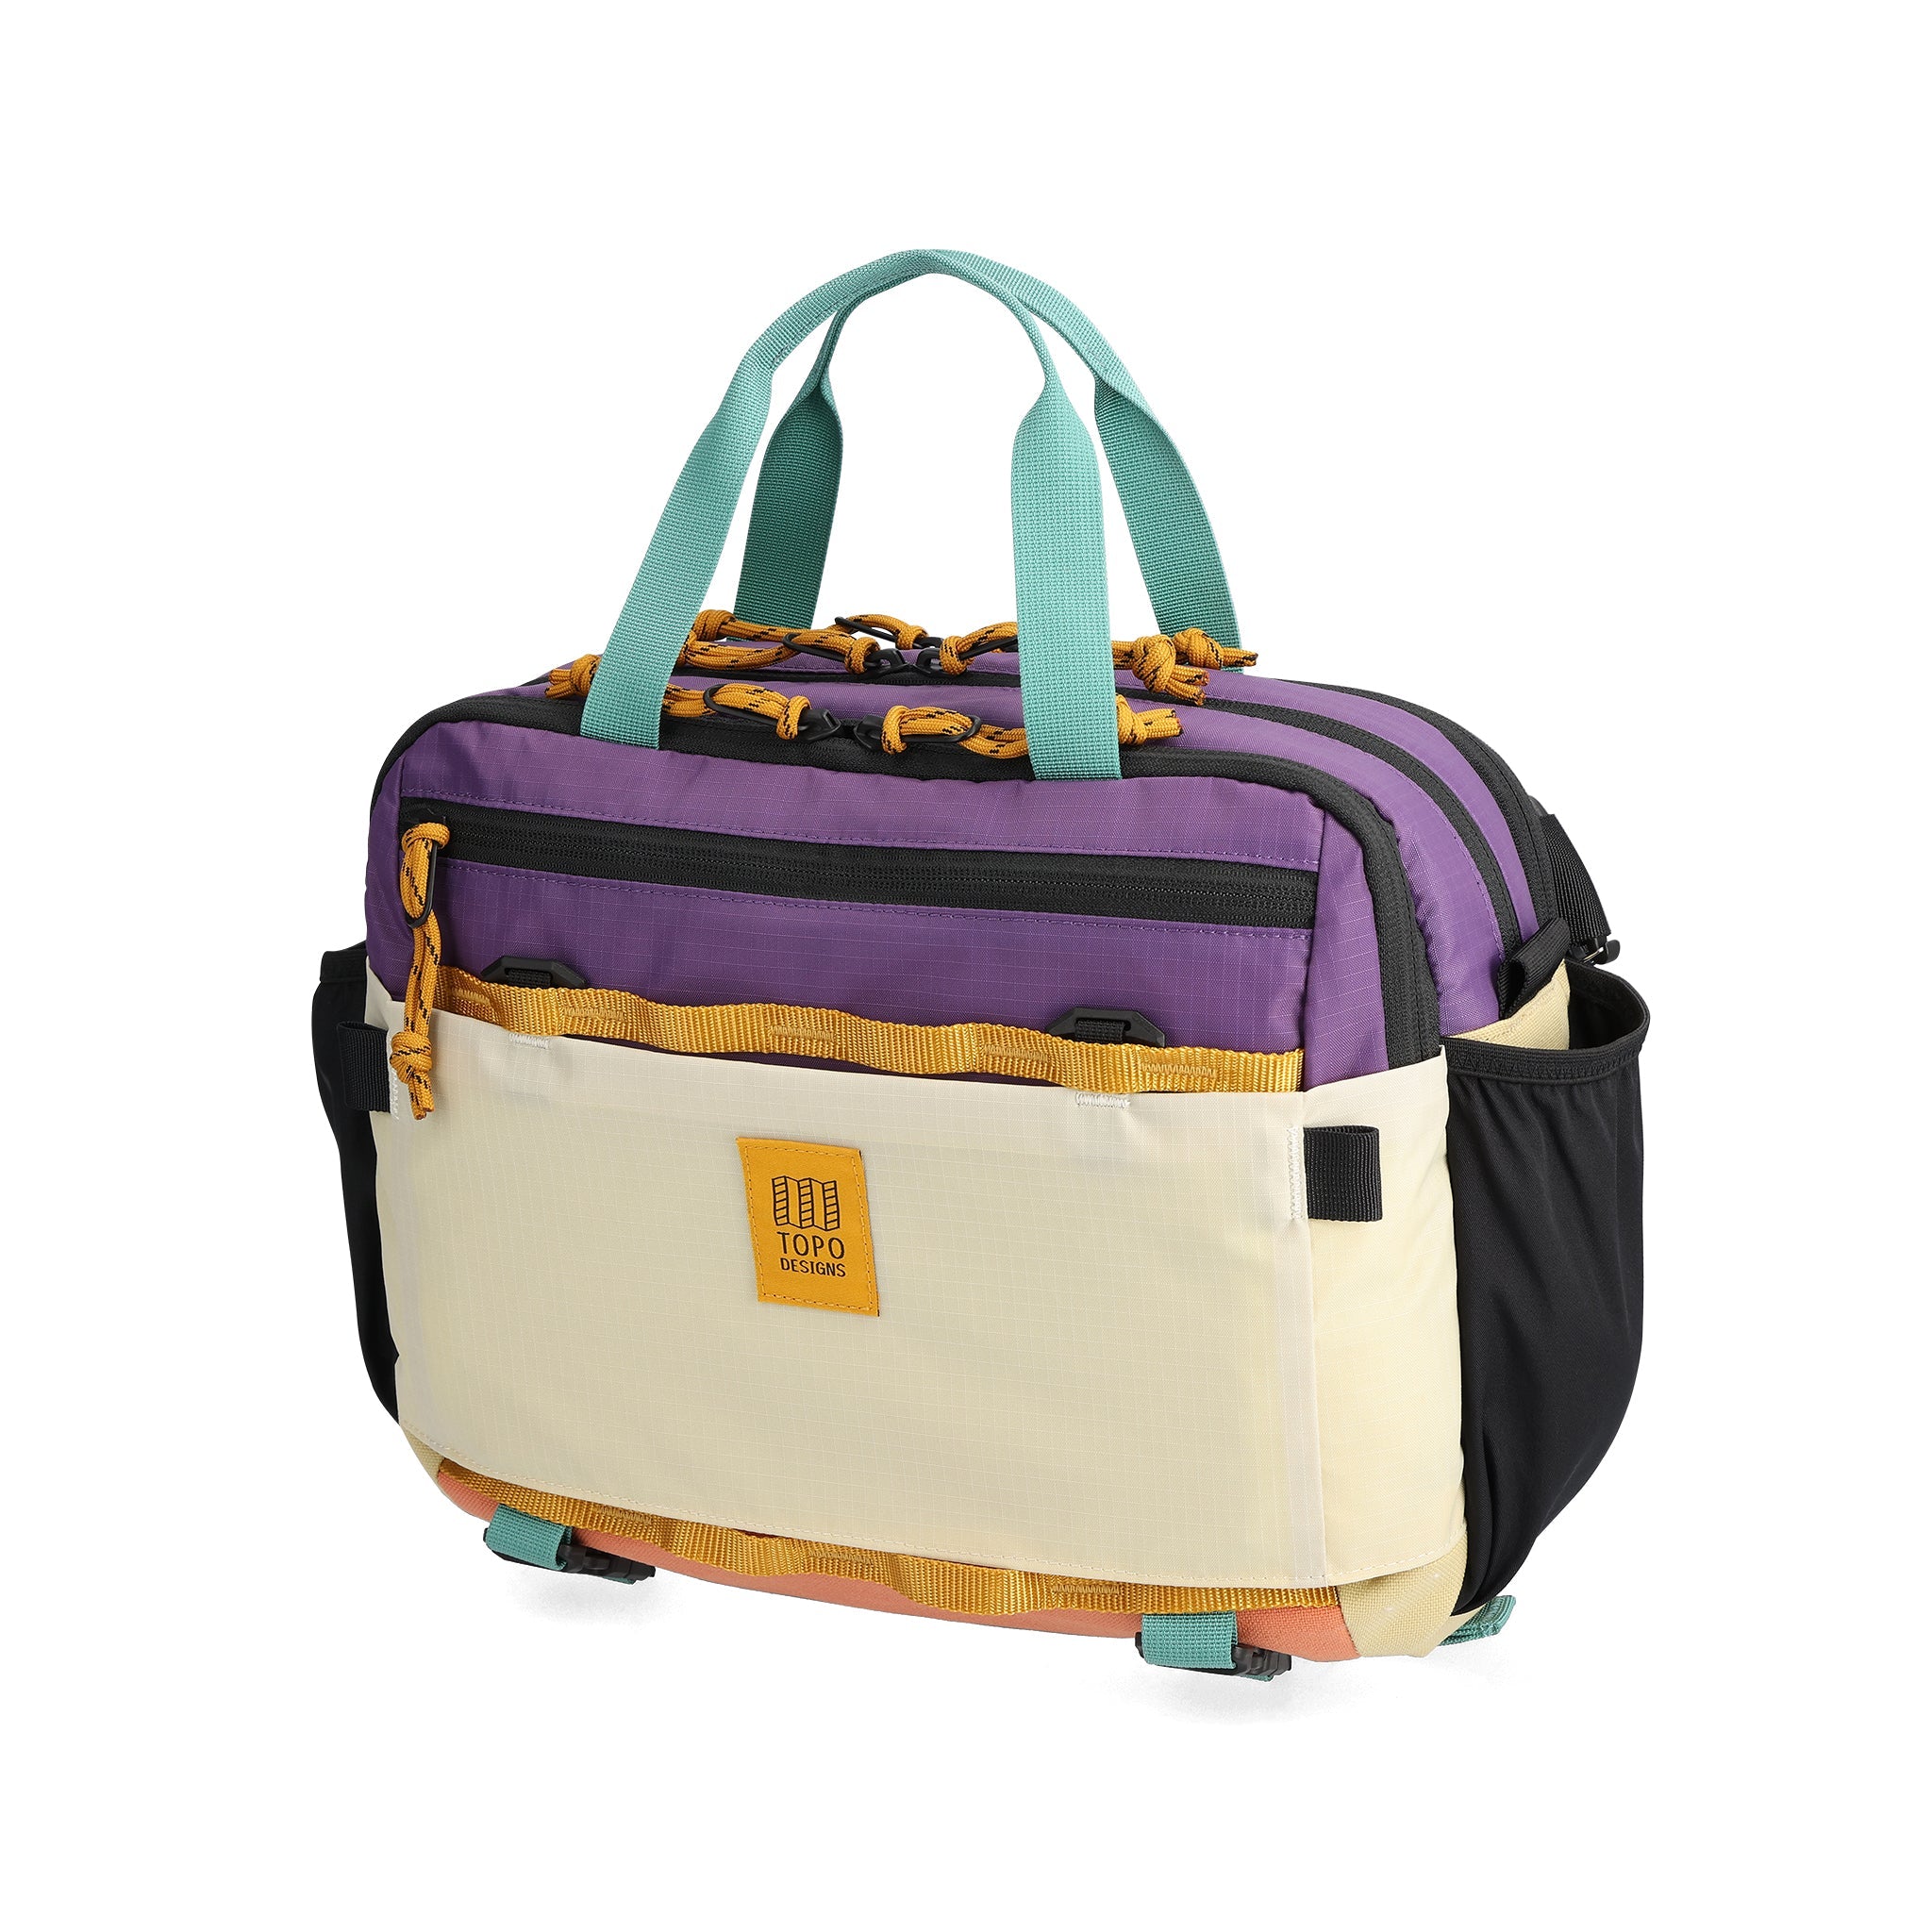 Front View of Topo Designs Mountain Cross Bag in "Loganberry / Bone White"